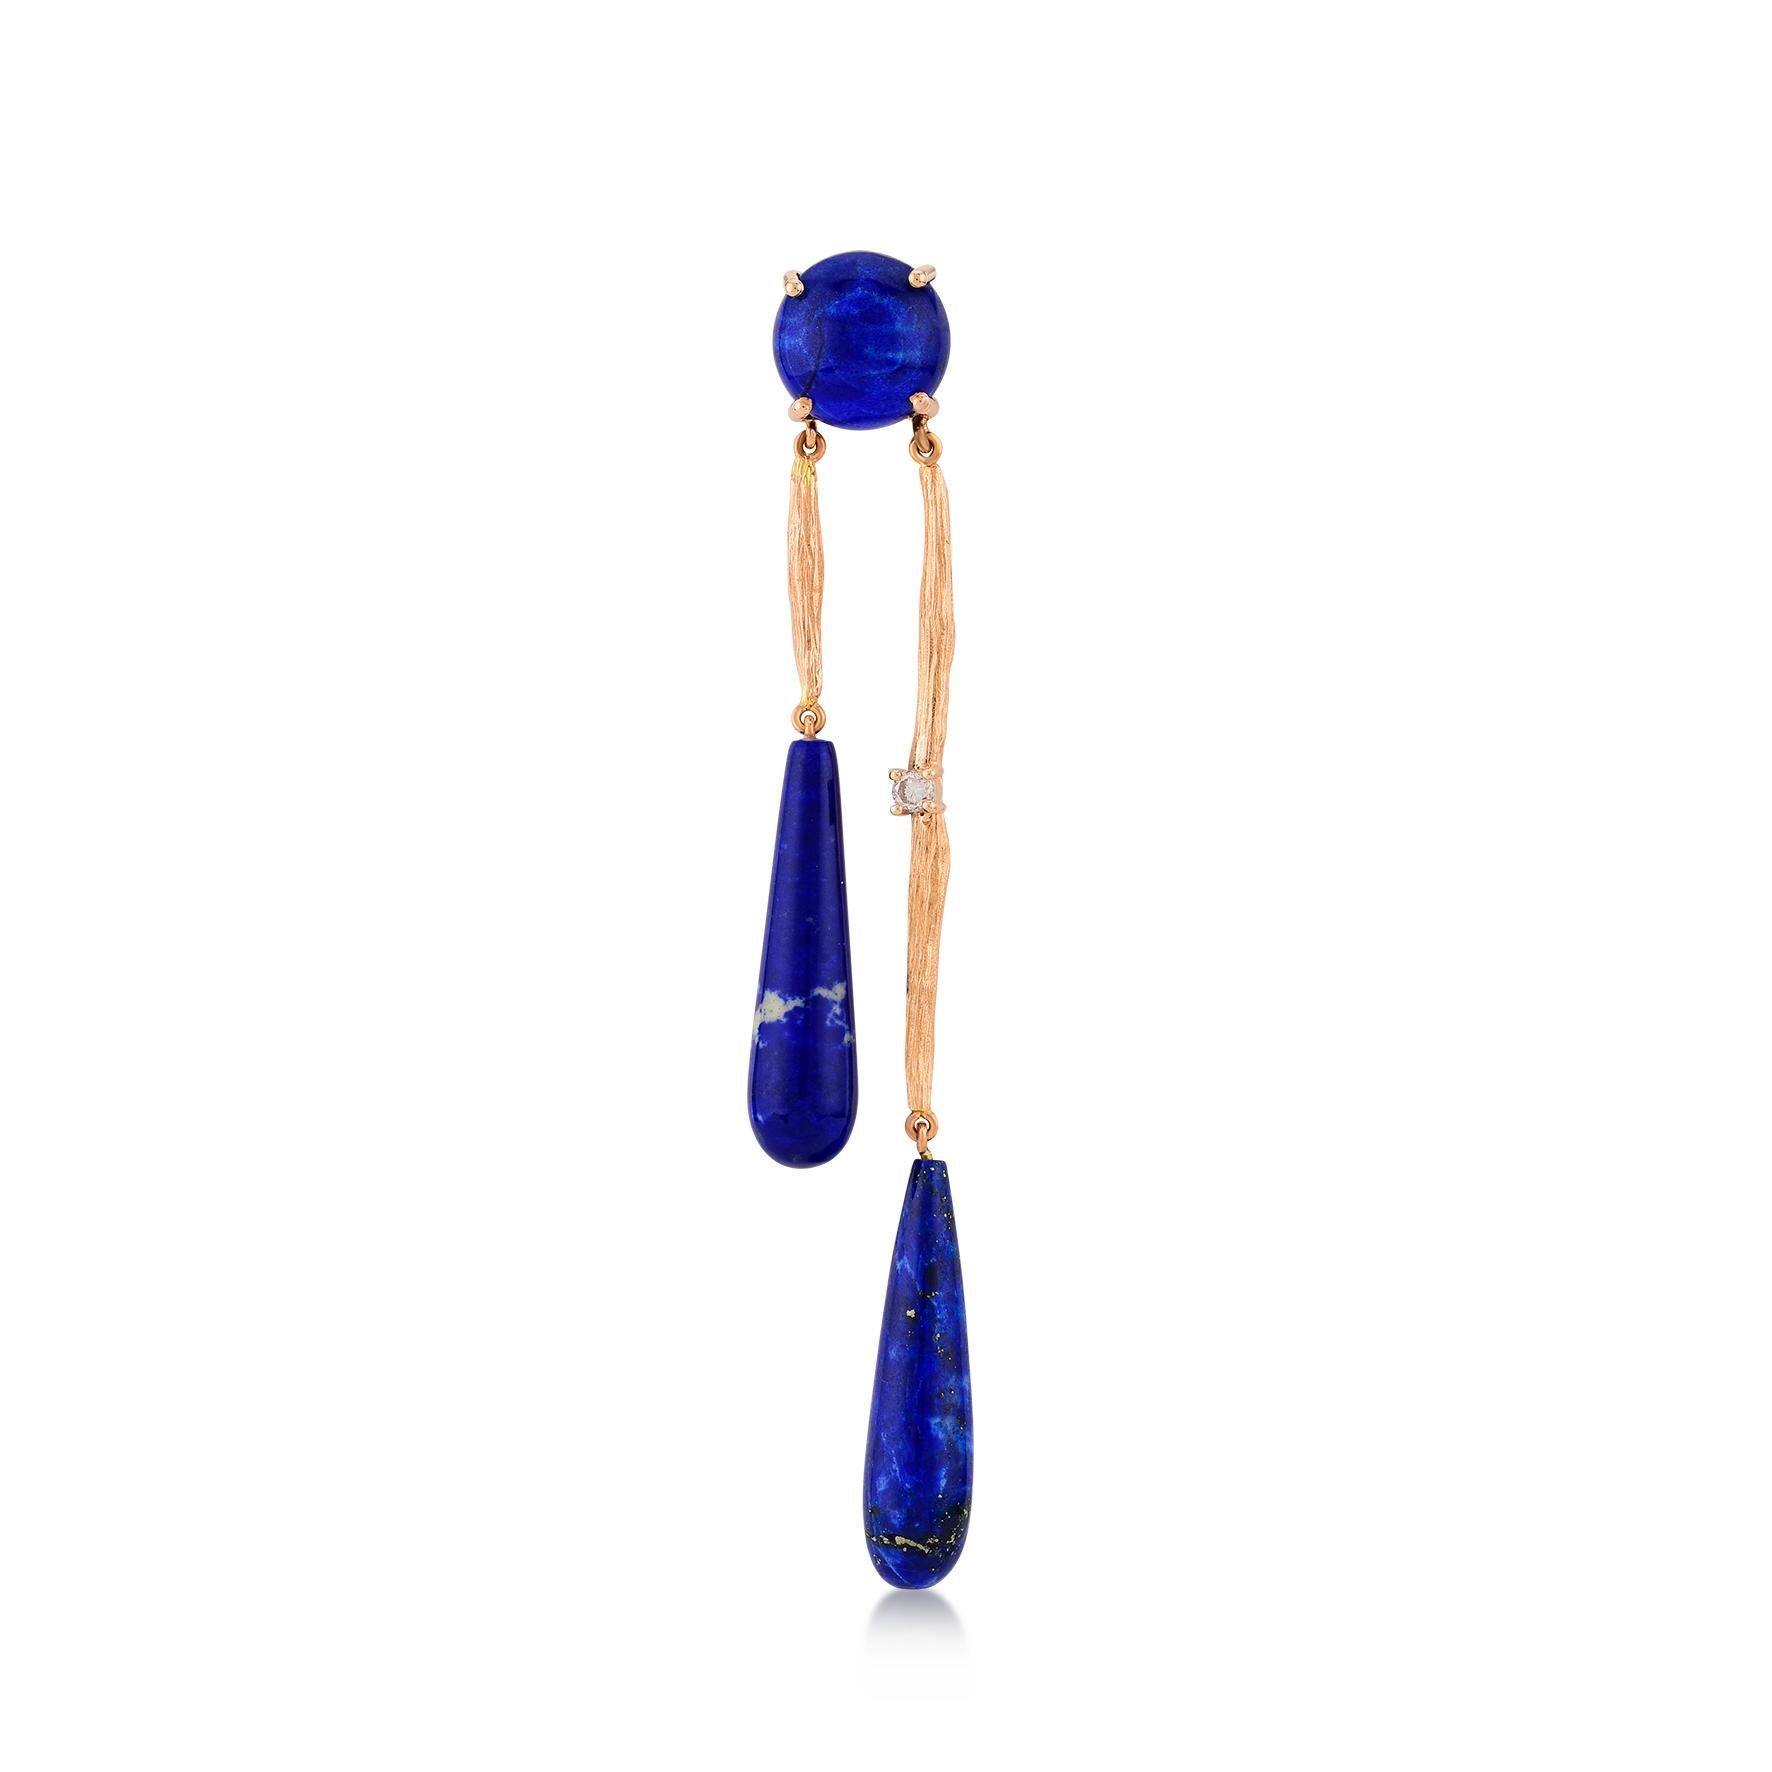 Helenka lapis dangle rose gold earrings with white diamond by Selda Jewellery

Additional Information:-
Collection: Treasures of the Sea Collection
14k Rose gold
0.12ct White diamond
Length 8cm